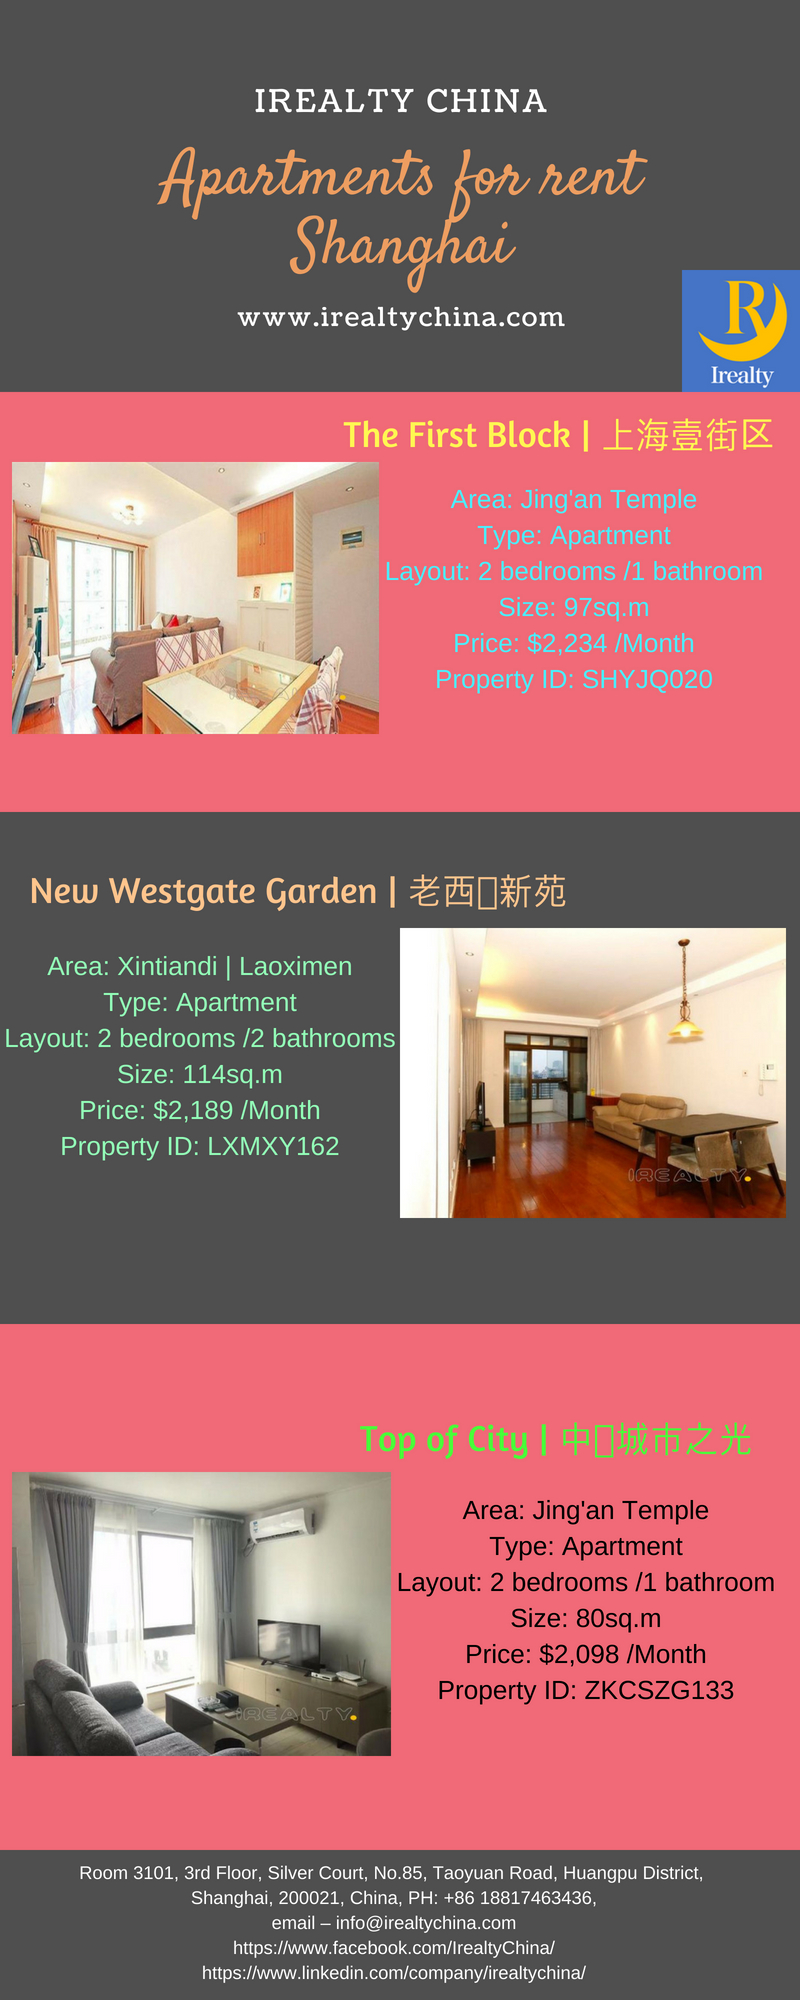 Apartments for rent Shanghai.jpg  by irealtychina